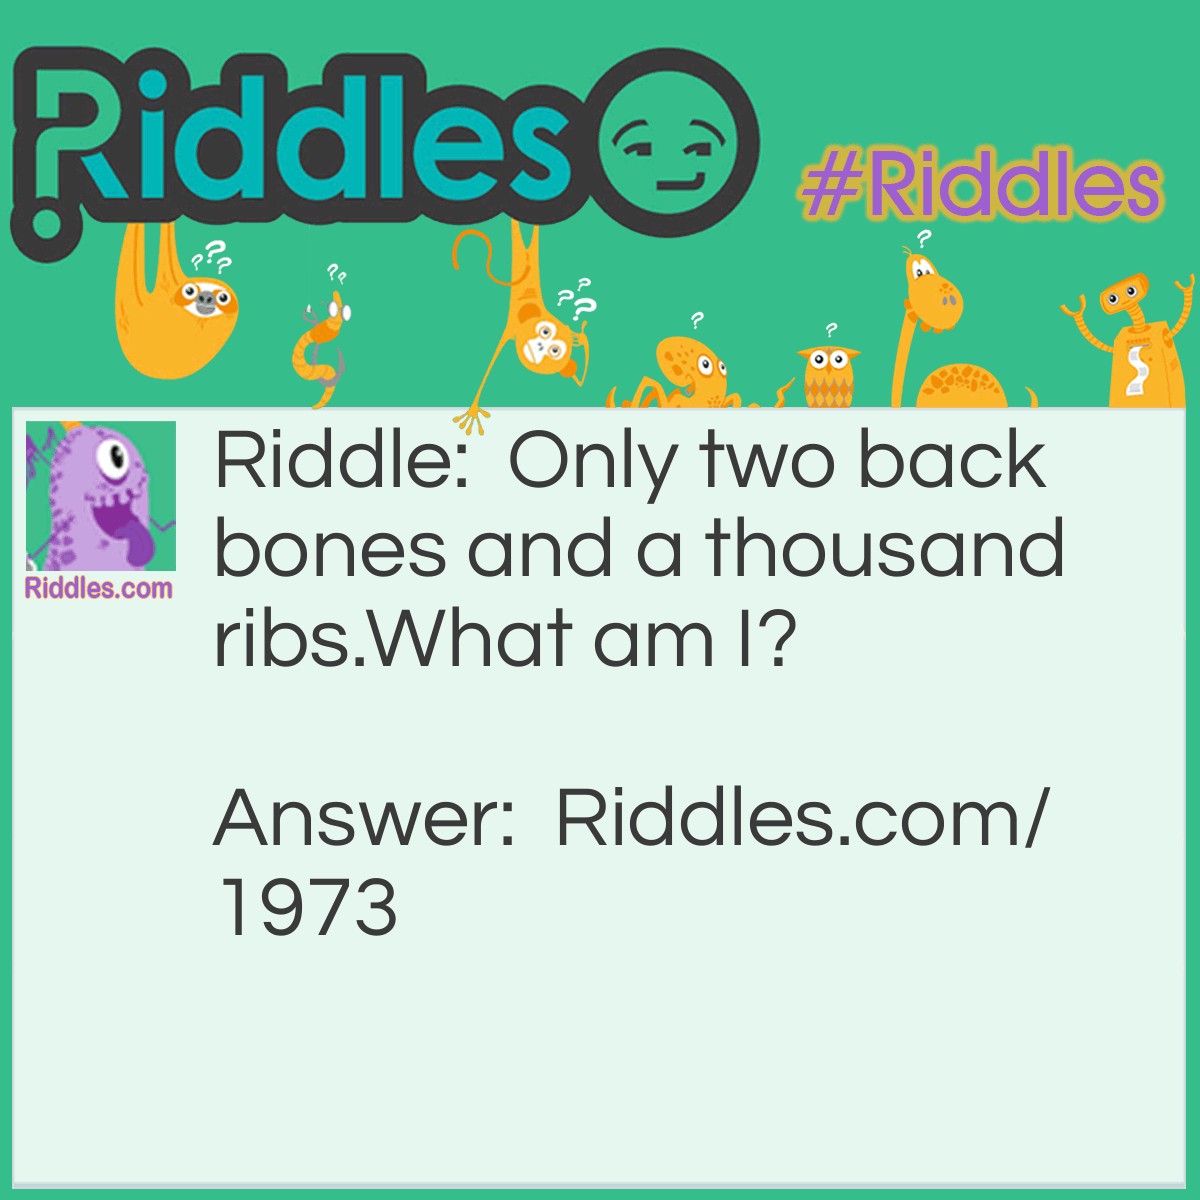 Riddle: Only two back bones and a thousand ribs.
What am I?
  Answer: Railroad track.